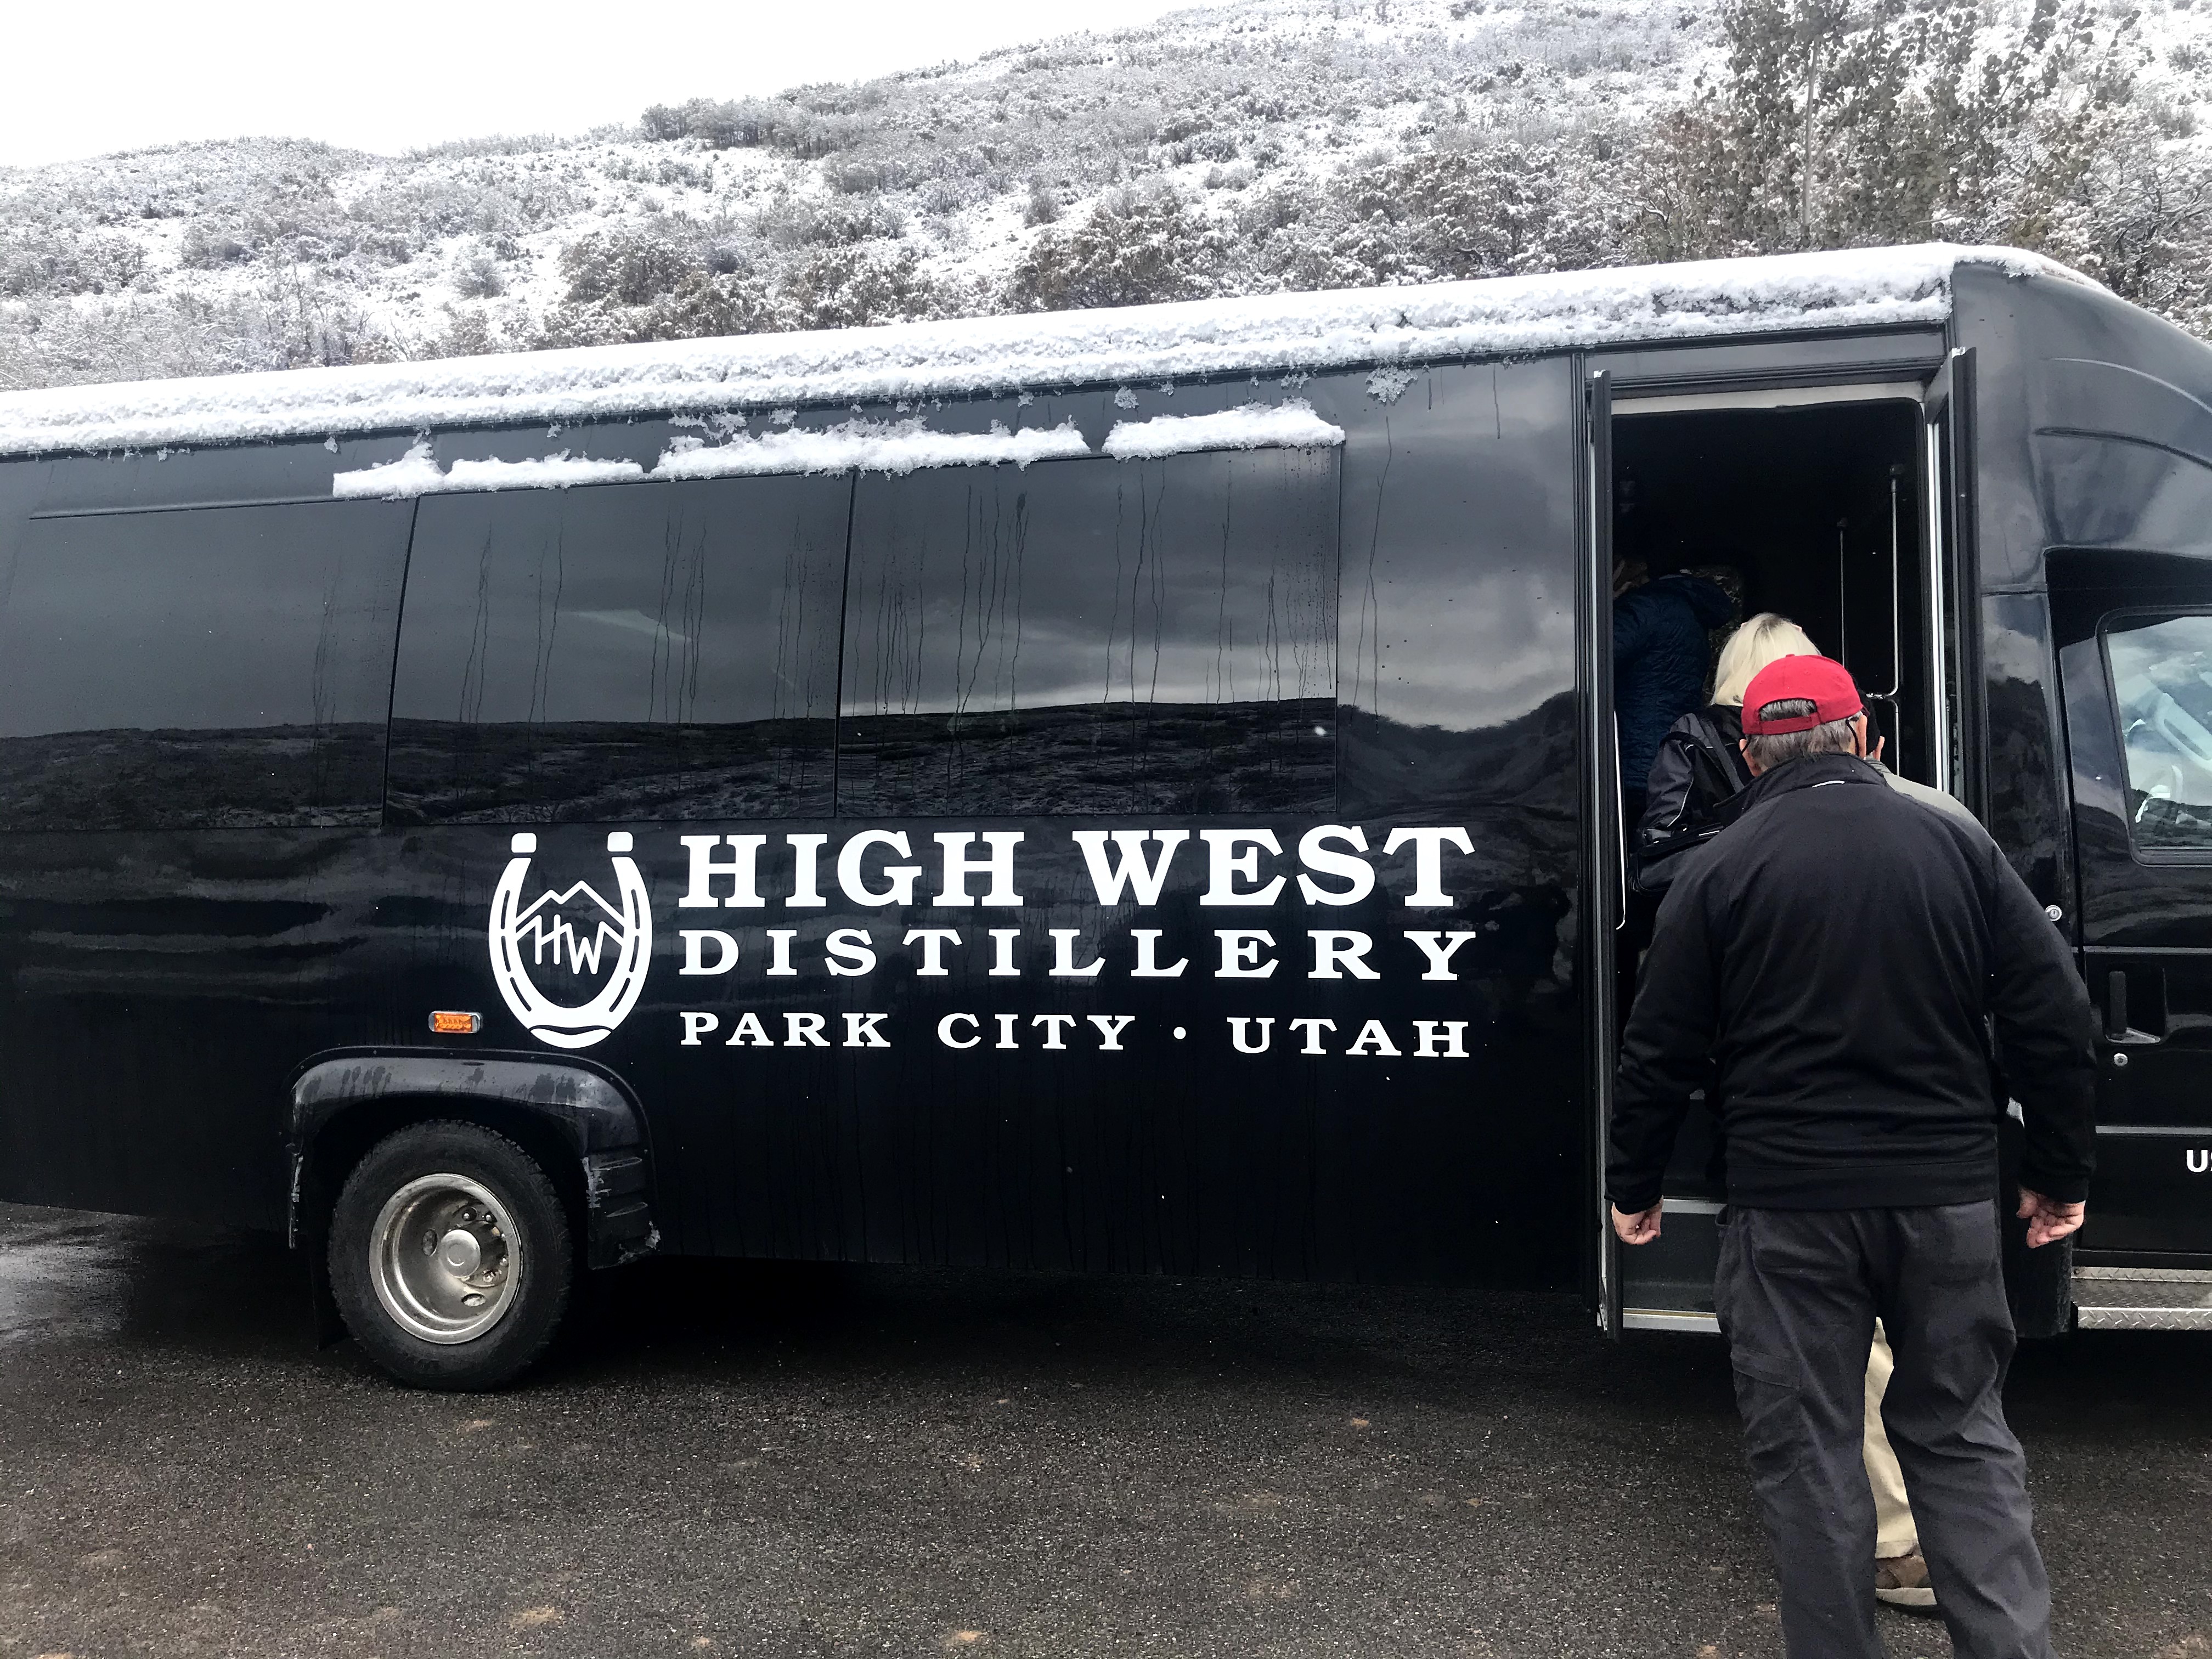 People loading into a black High West Distillery Bus